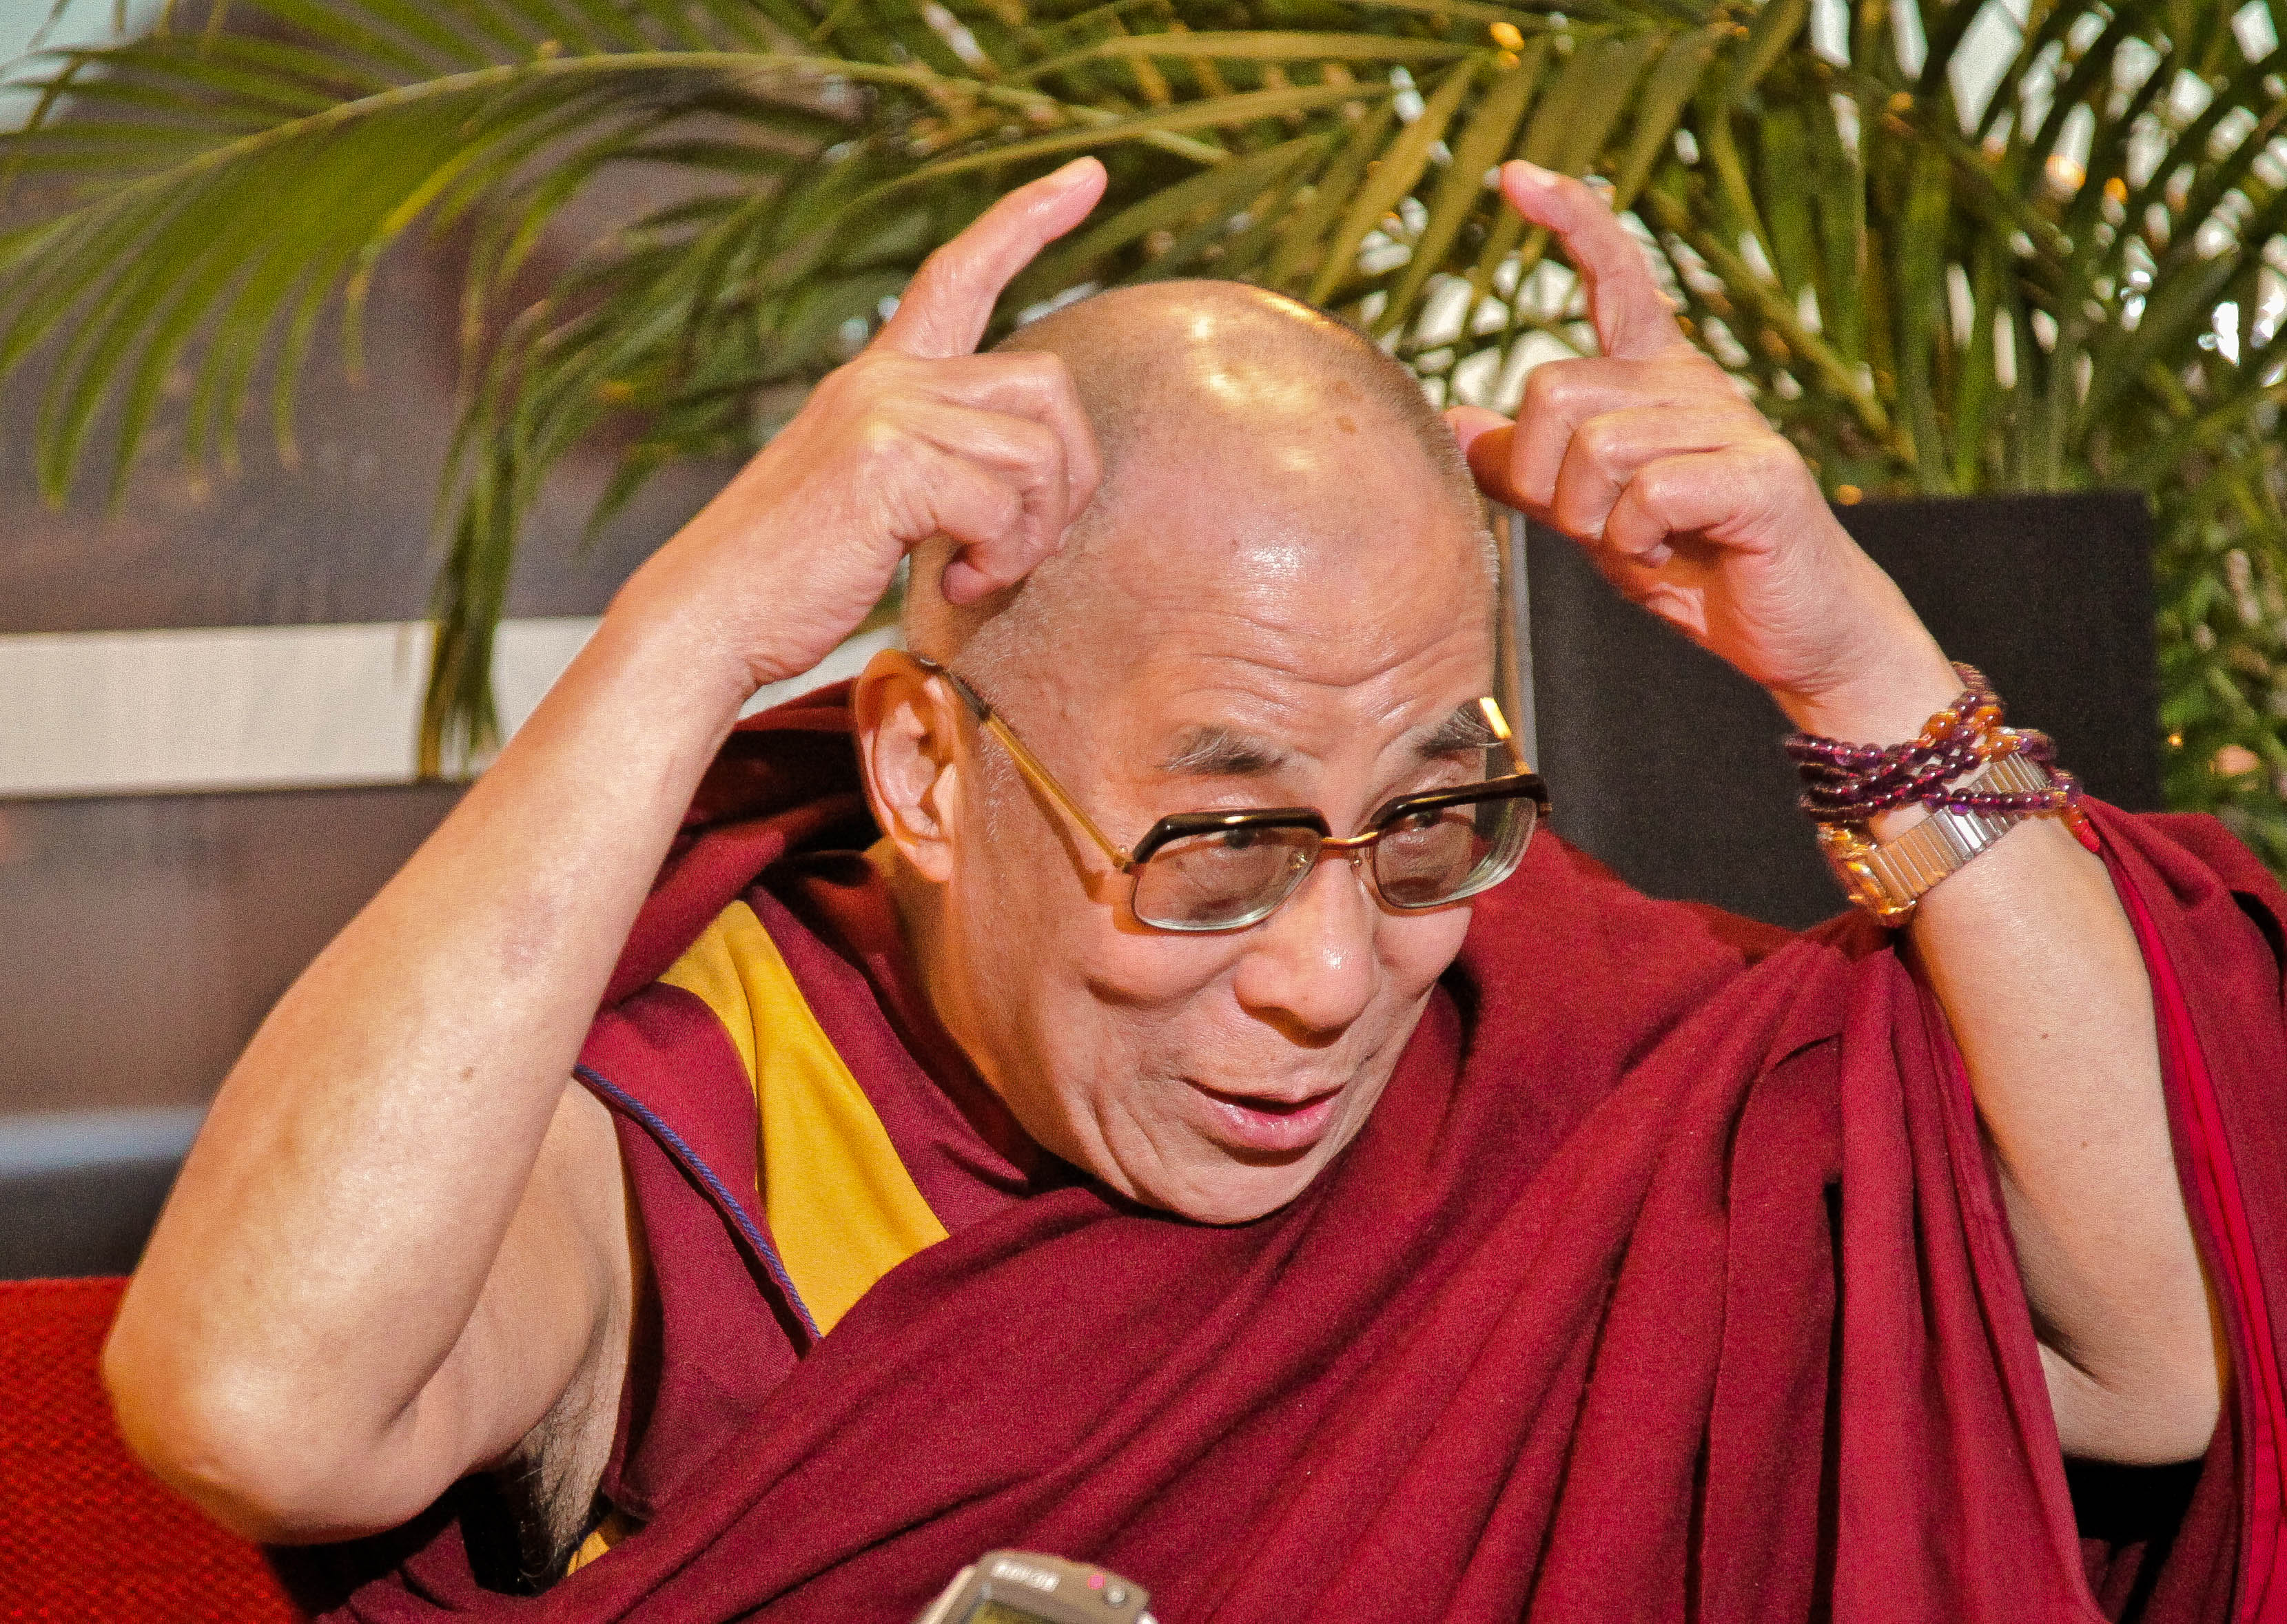 “China says I am a demon, with horns like this.” The Dalai Lama at a press conference in Sweden, 2011. Photo: Erik Törner, used under Creative Commons Licence.